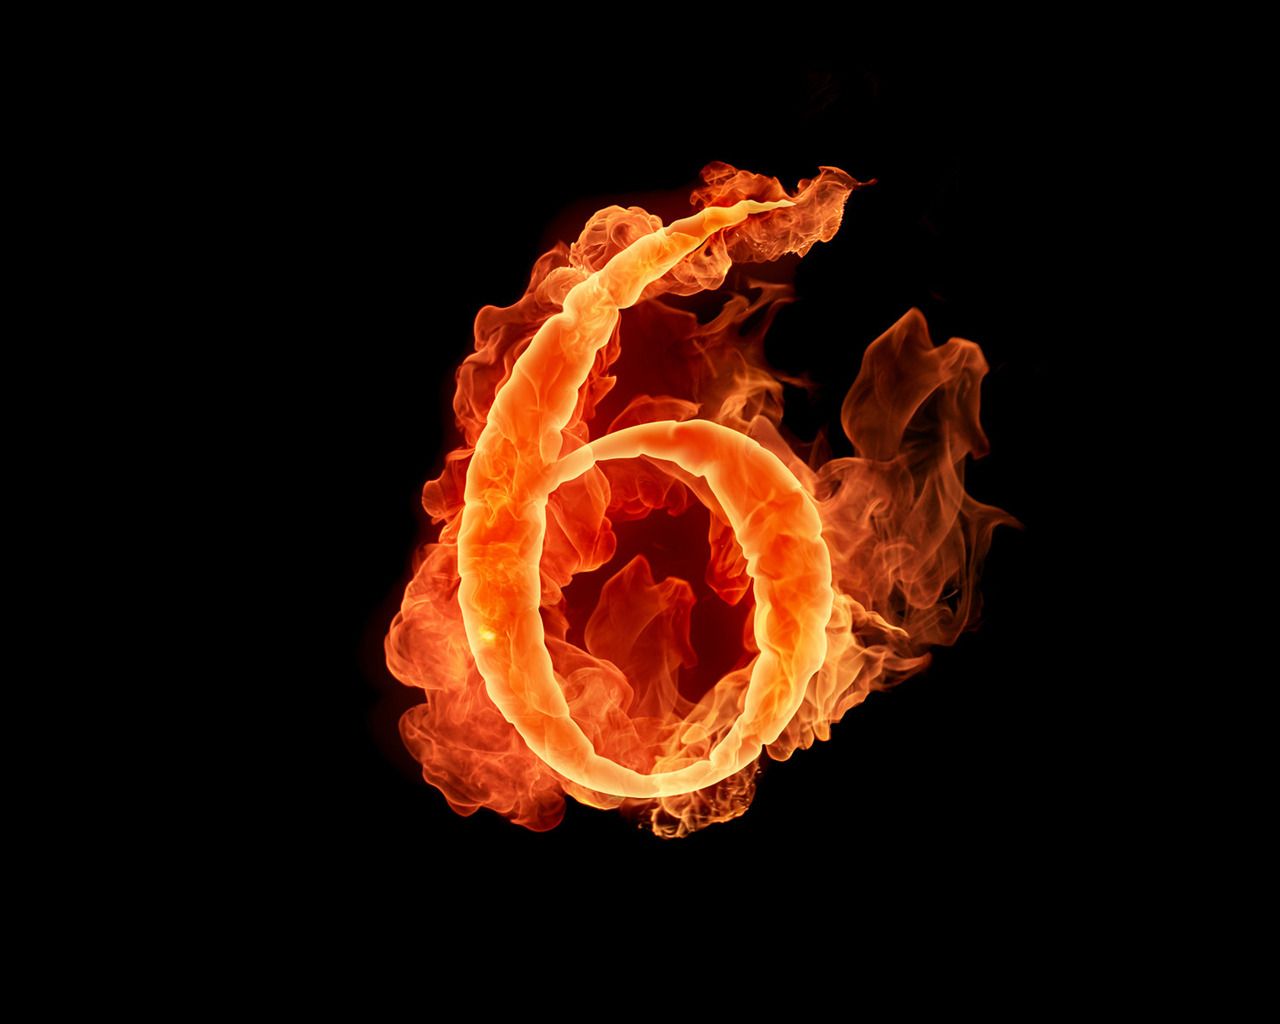 Fire Fonts Letters and Fiery Numbers 1280x1024 NO.33 Desktop Wallpaper